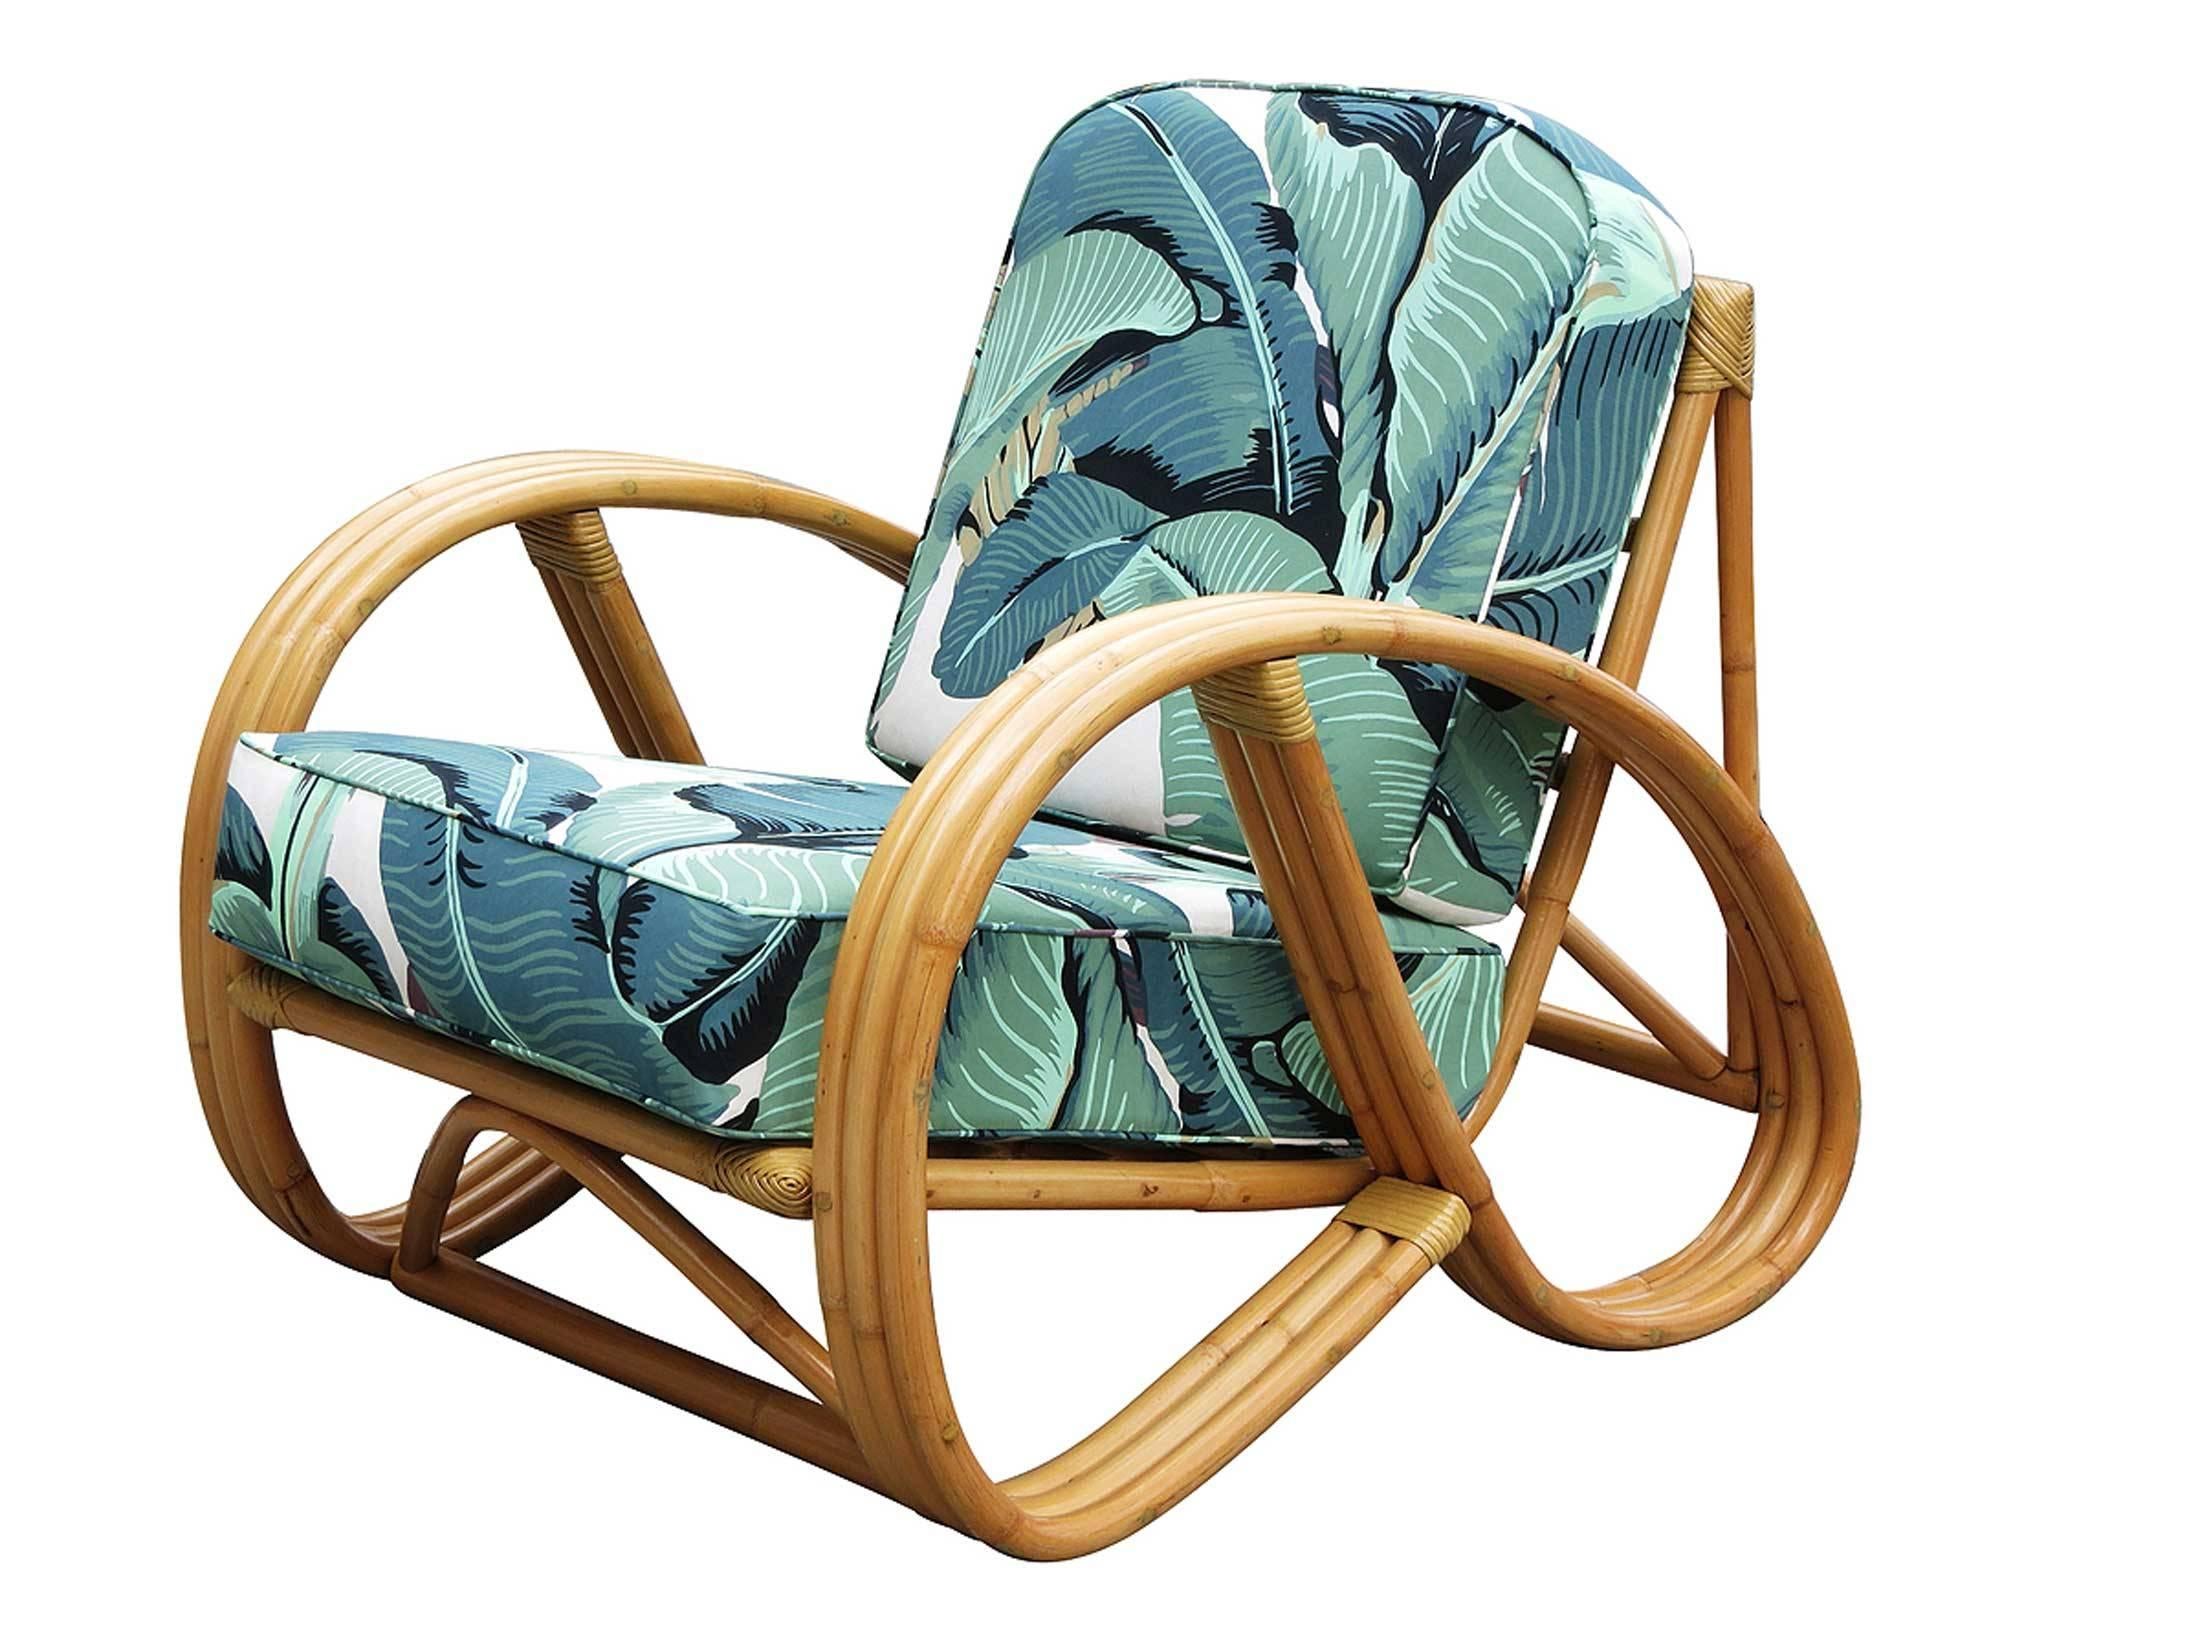 This round 3/4 pretzel arm rattan lounge chair.

This arm chair dates from the 1940s with optional "Martinique Banana Leaf" cushions featuring hand screened/painted Martinique fabric by the original manufacture in Los Angeles.

This